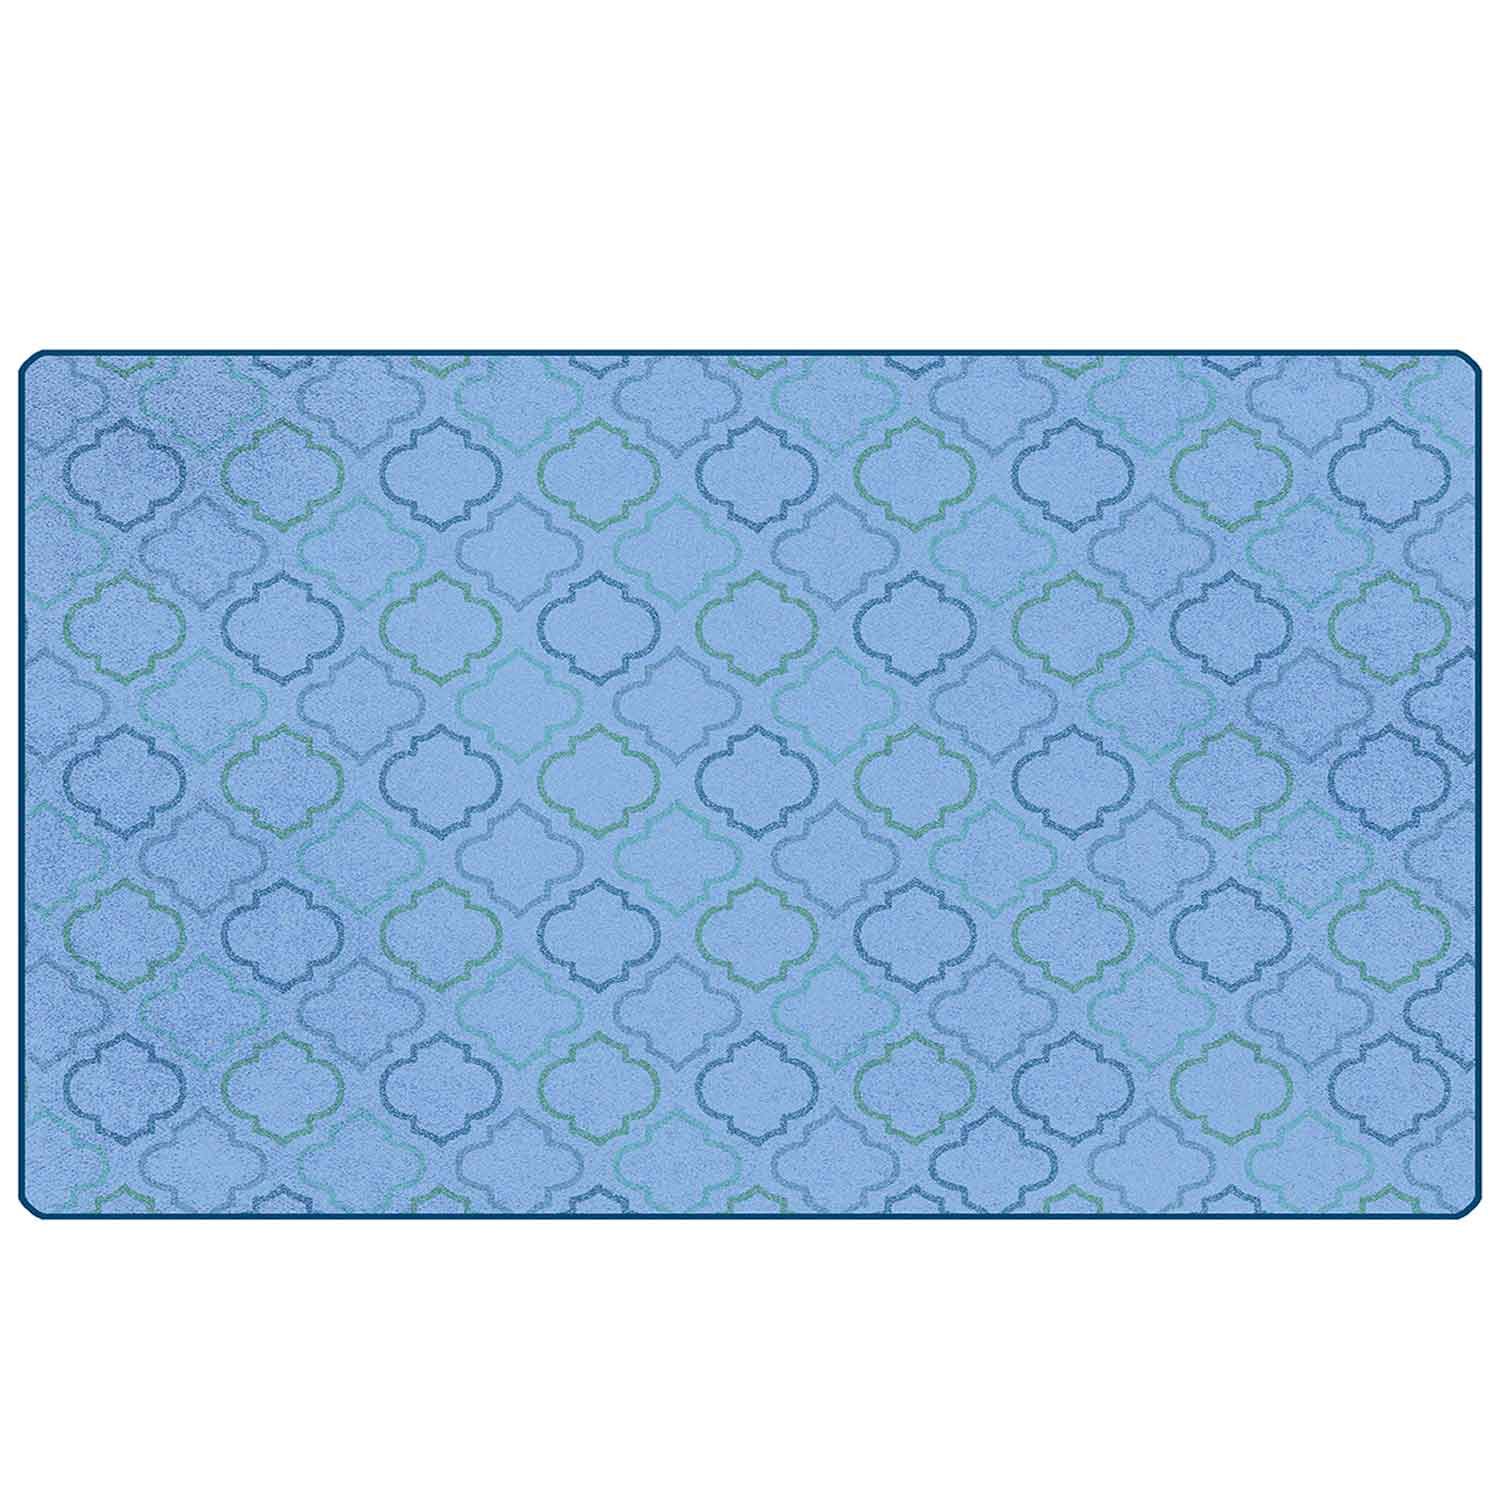 Pixel Perfect™ Mellow Morocco Rug, Rectangle 6 x 9